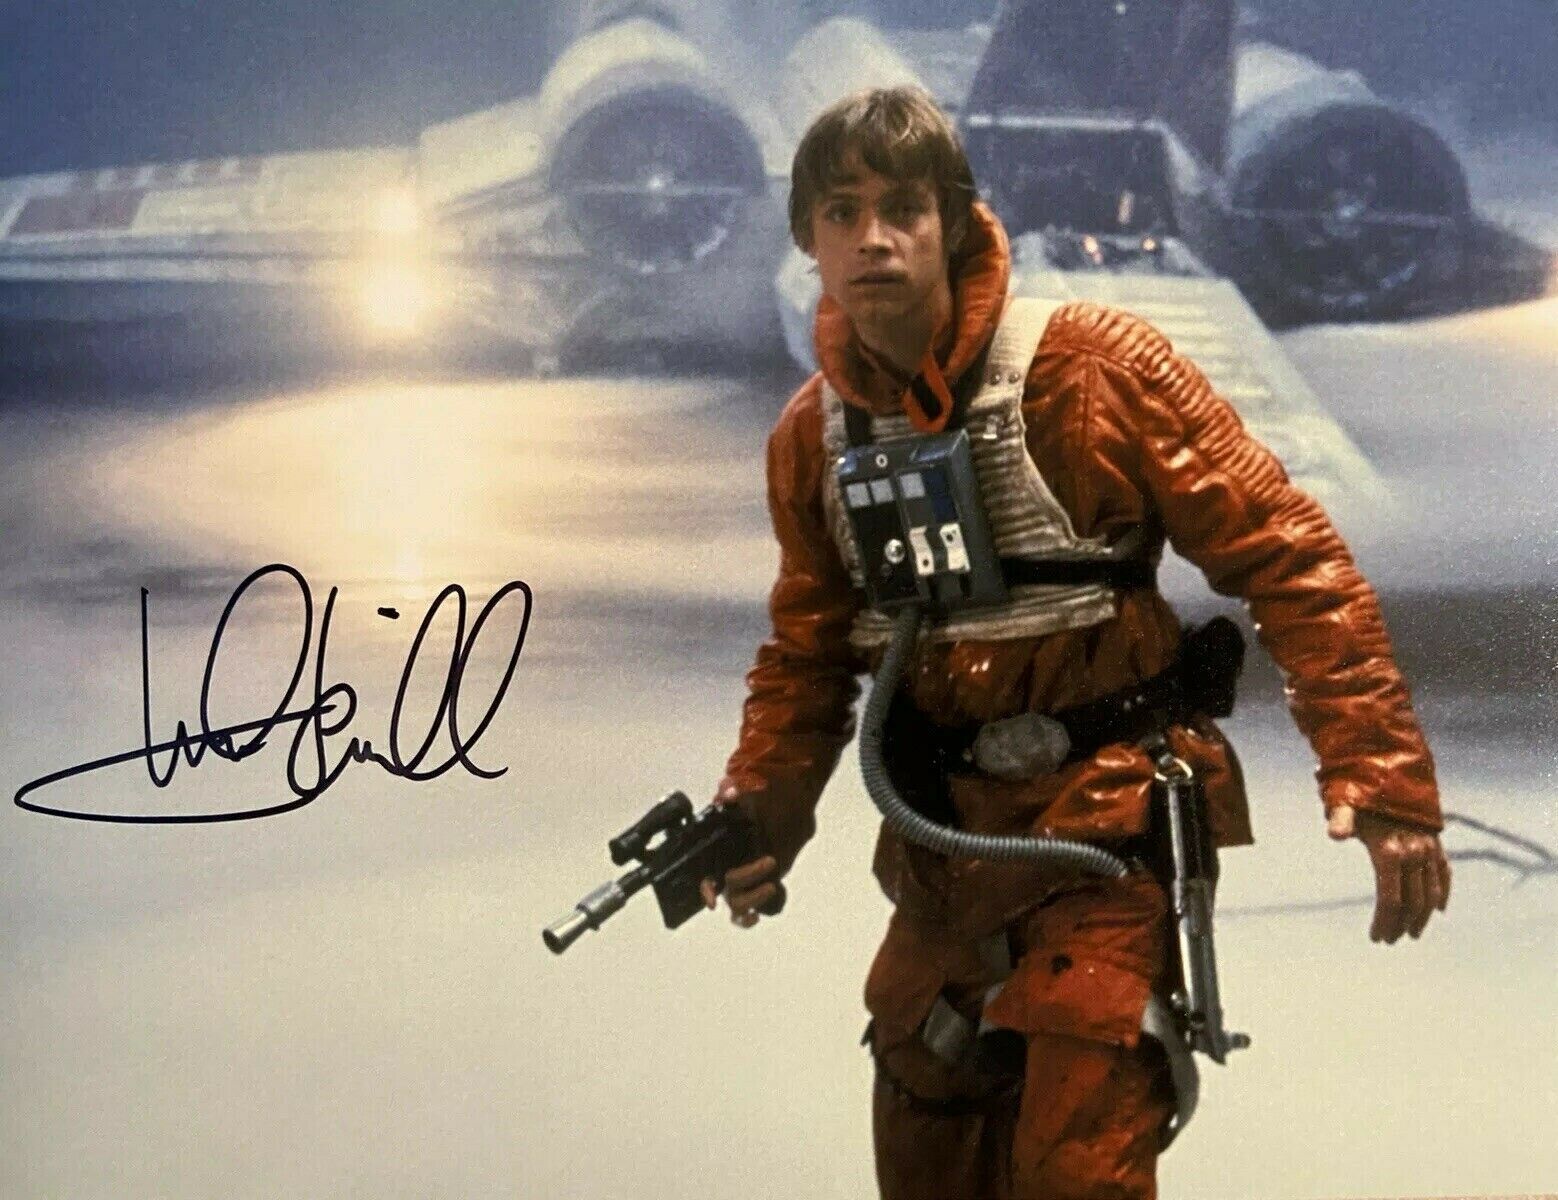 Mark Hamill Autographed Signed 8x10 Photo ( Star Wars ) Reprint